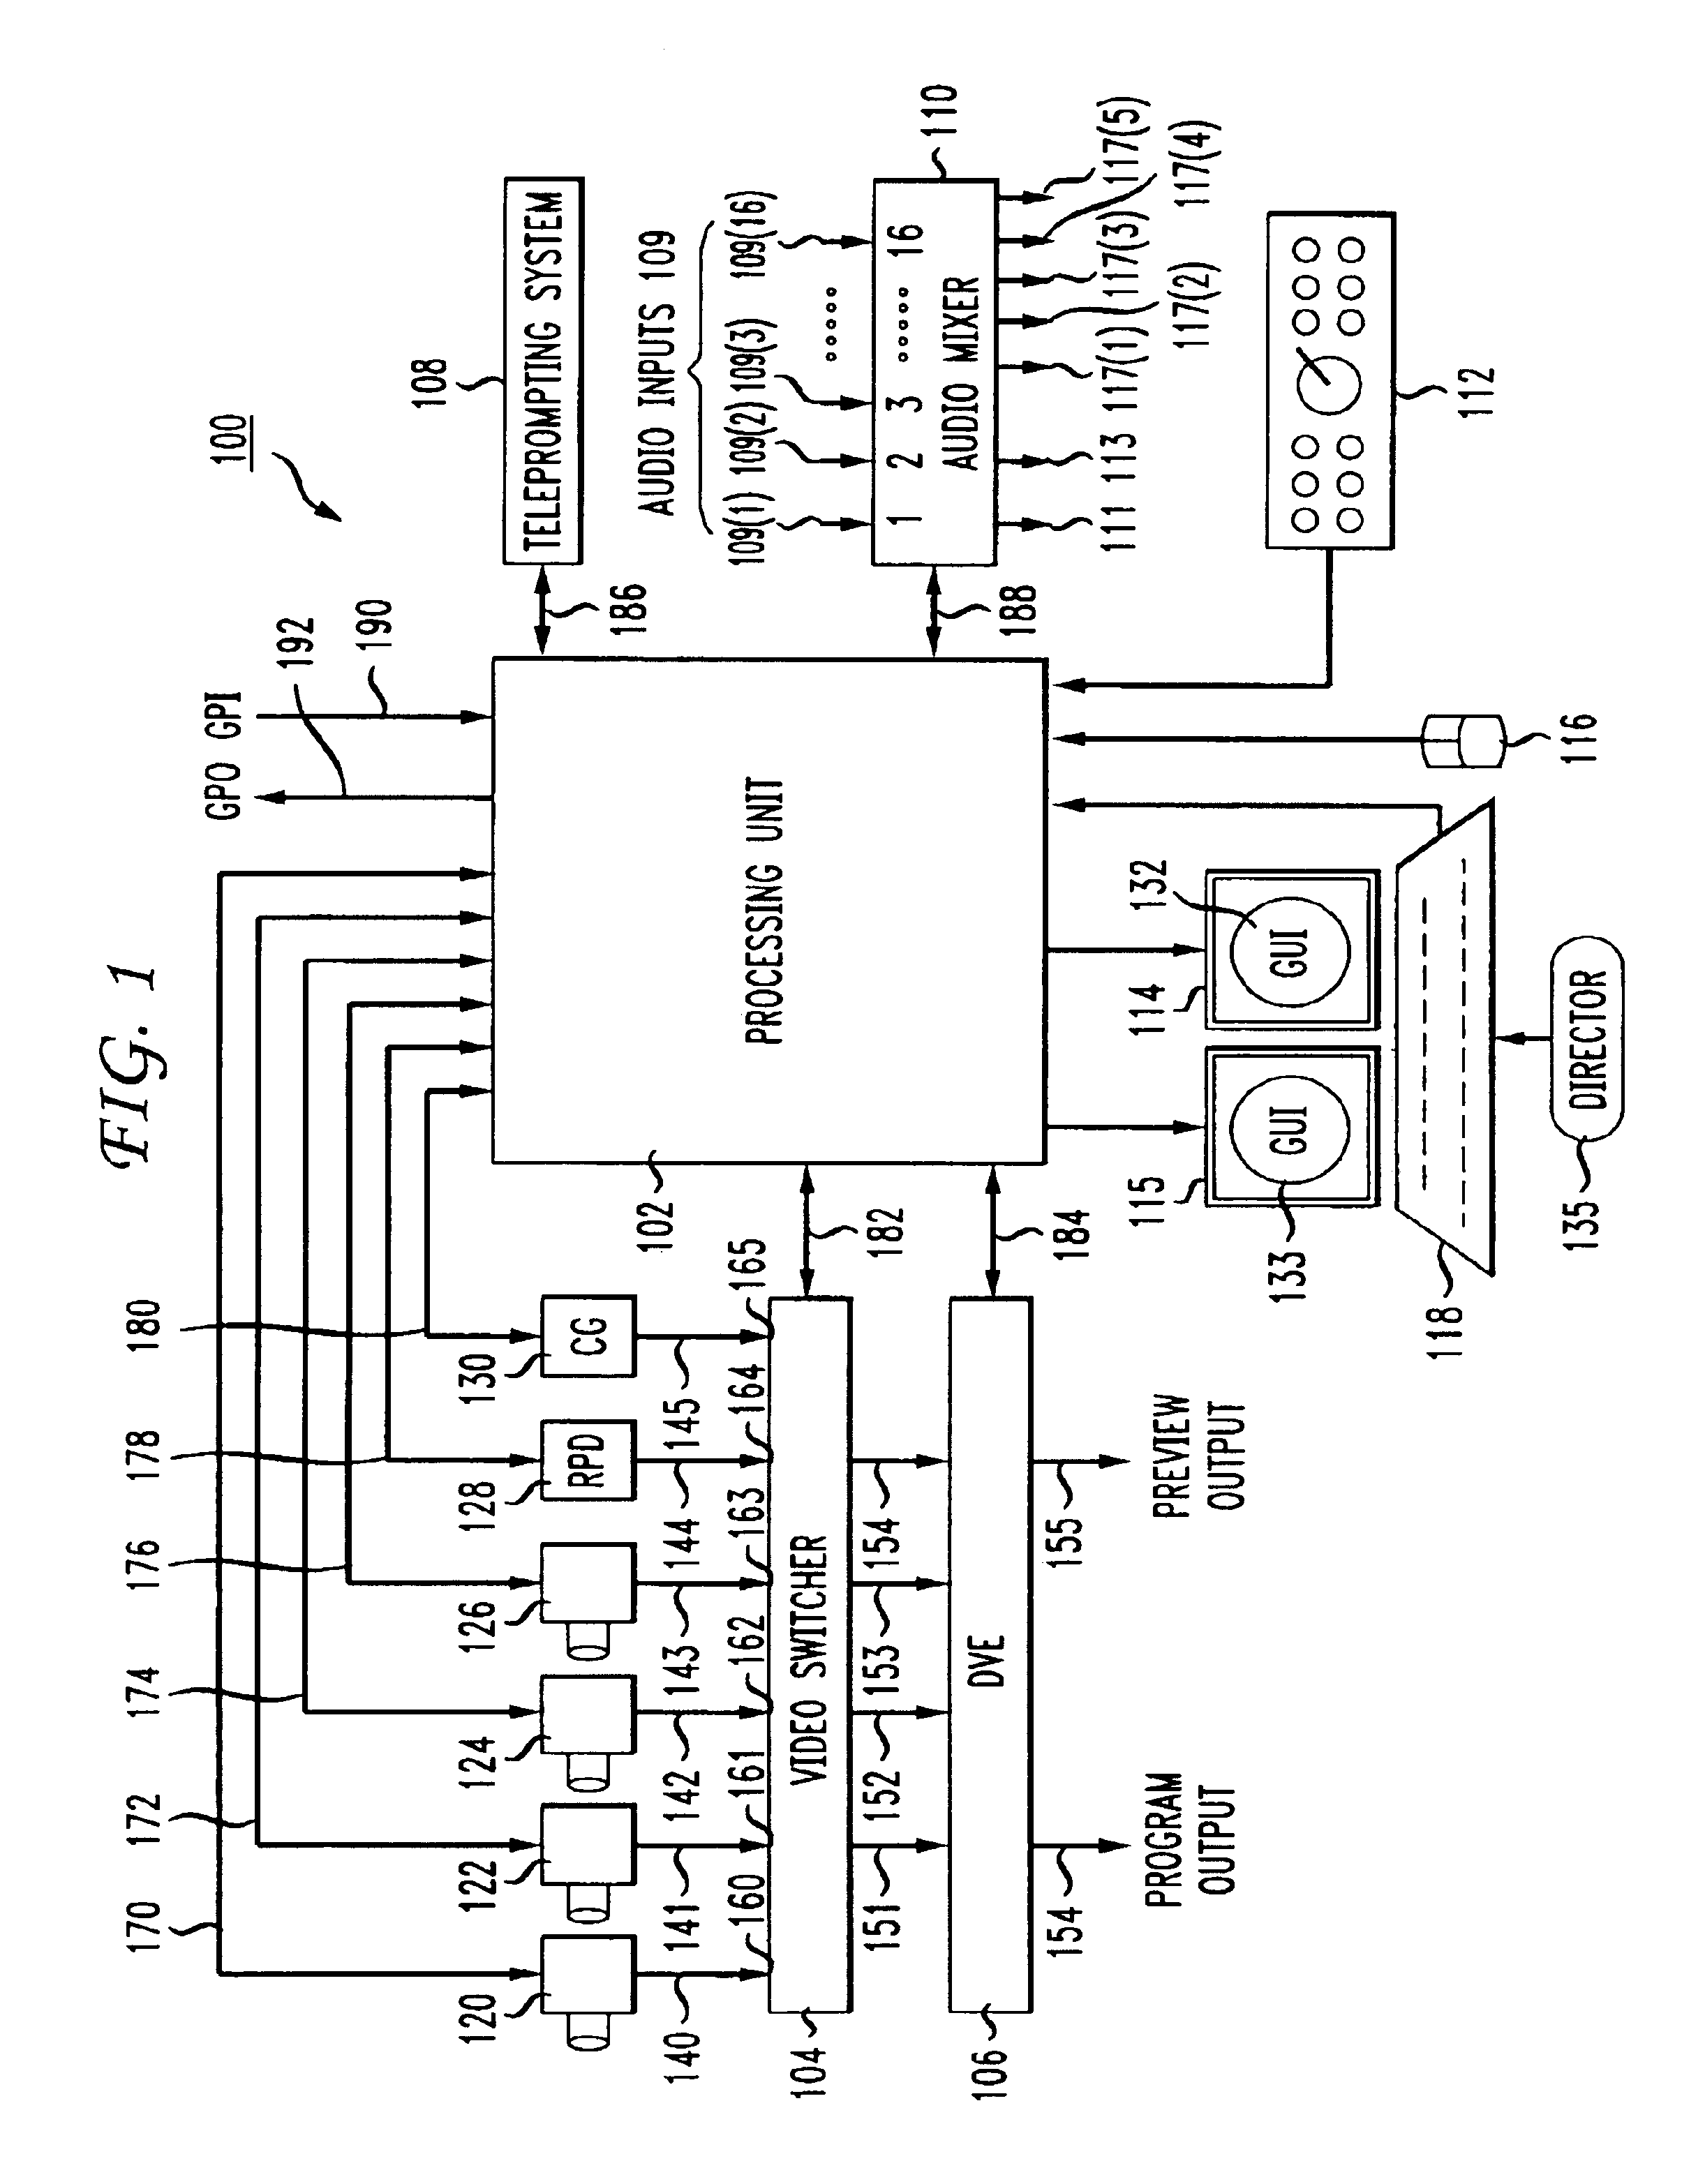 System and method for real time video production and distribution